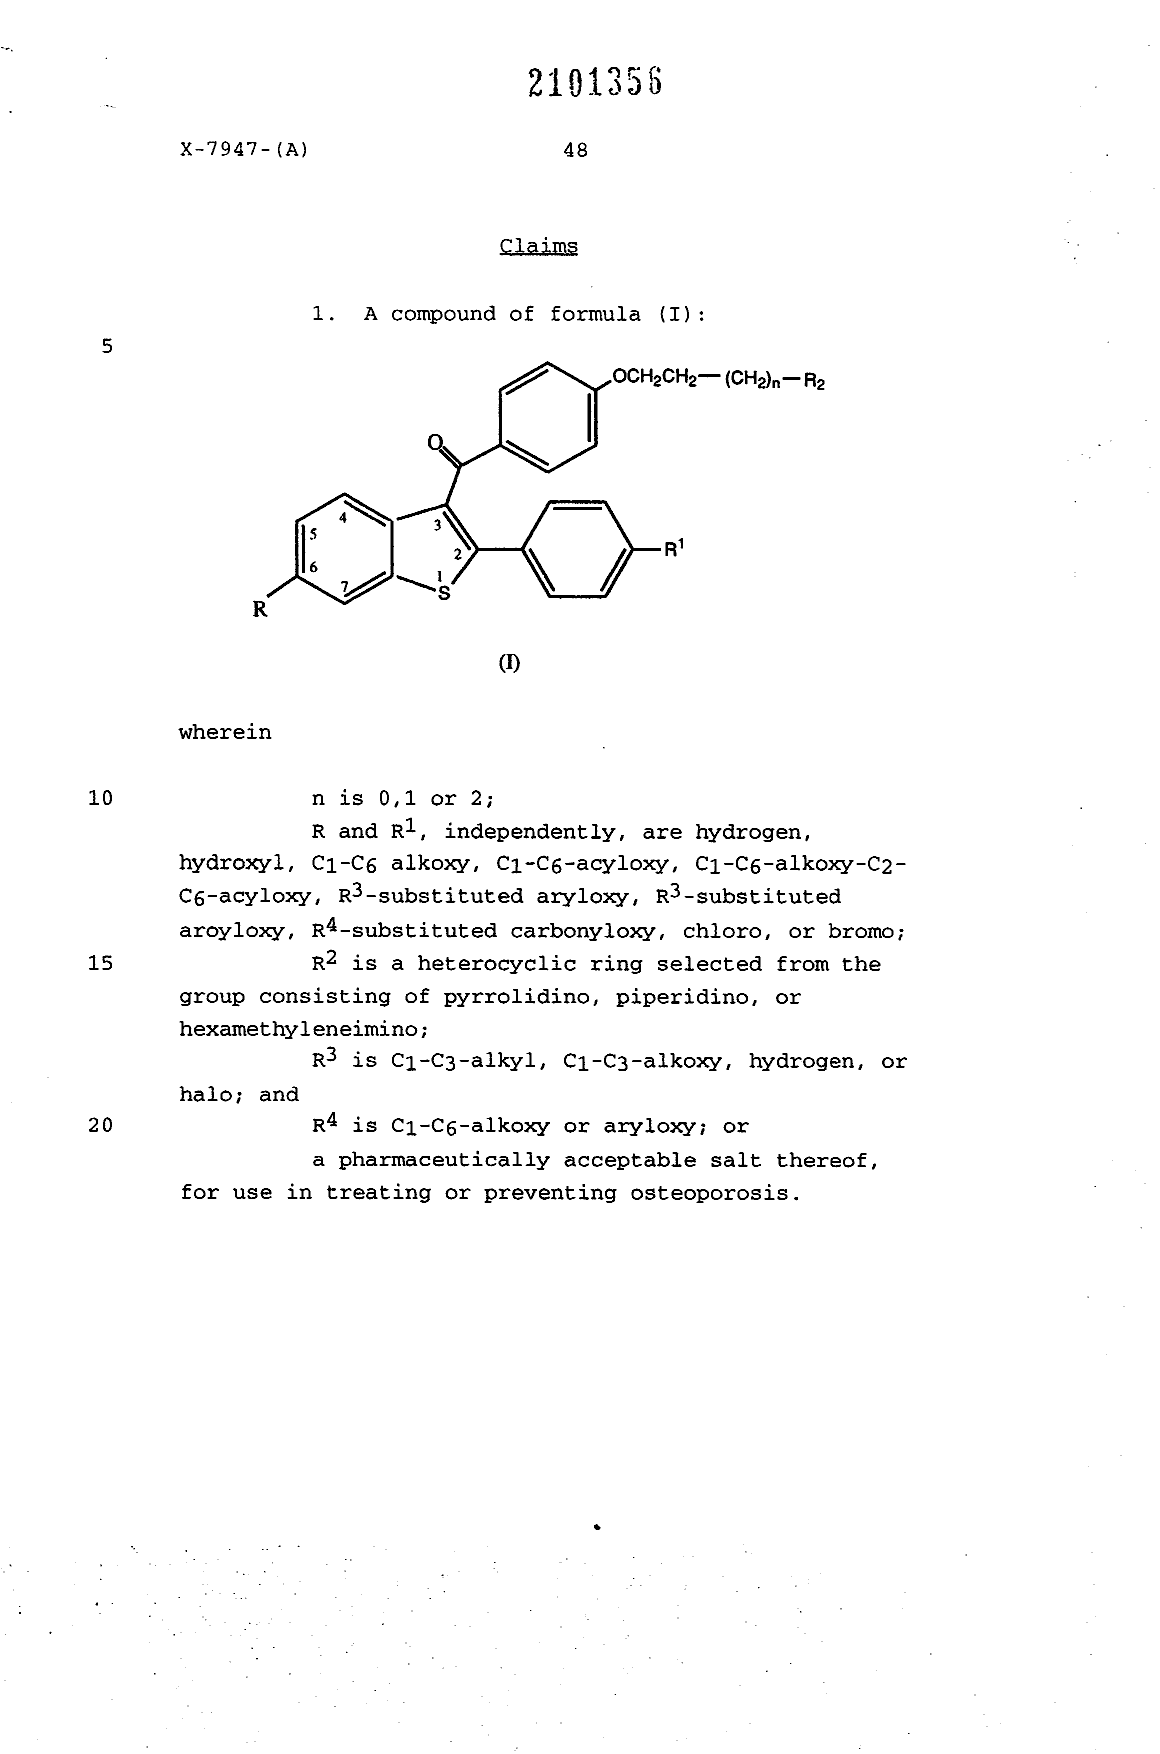 Canadian Patent Document 2101356. Claims 19931219. Image 1 of 2